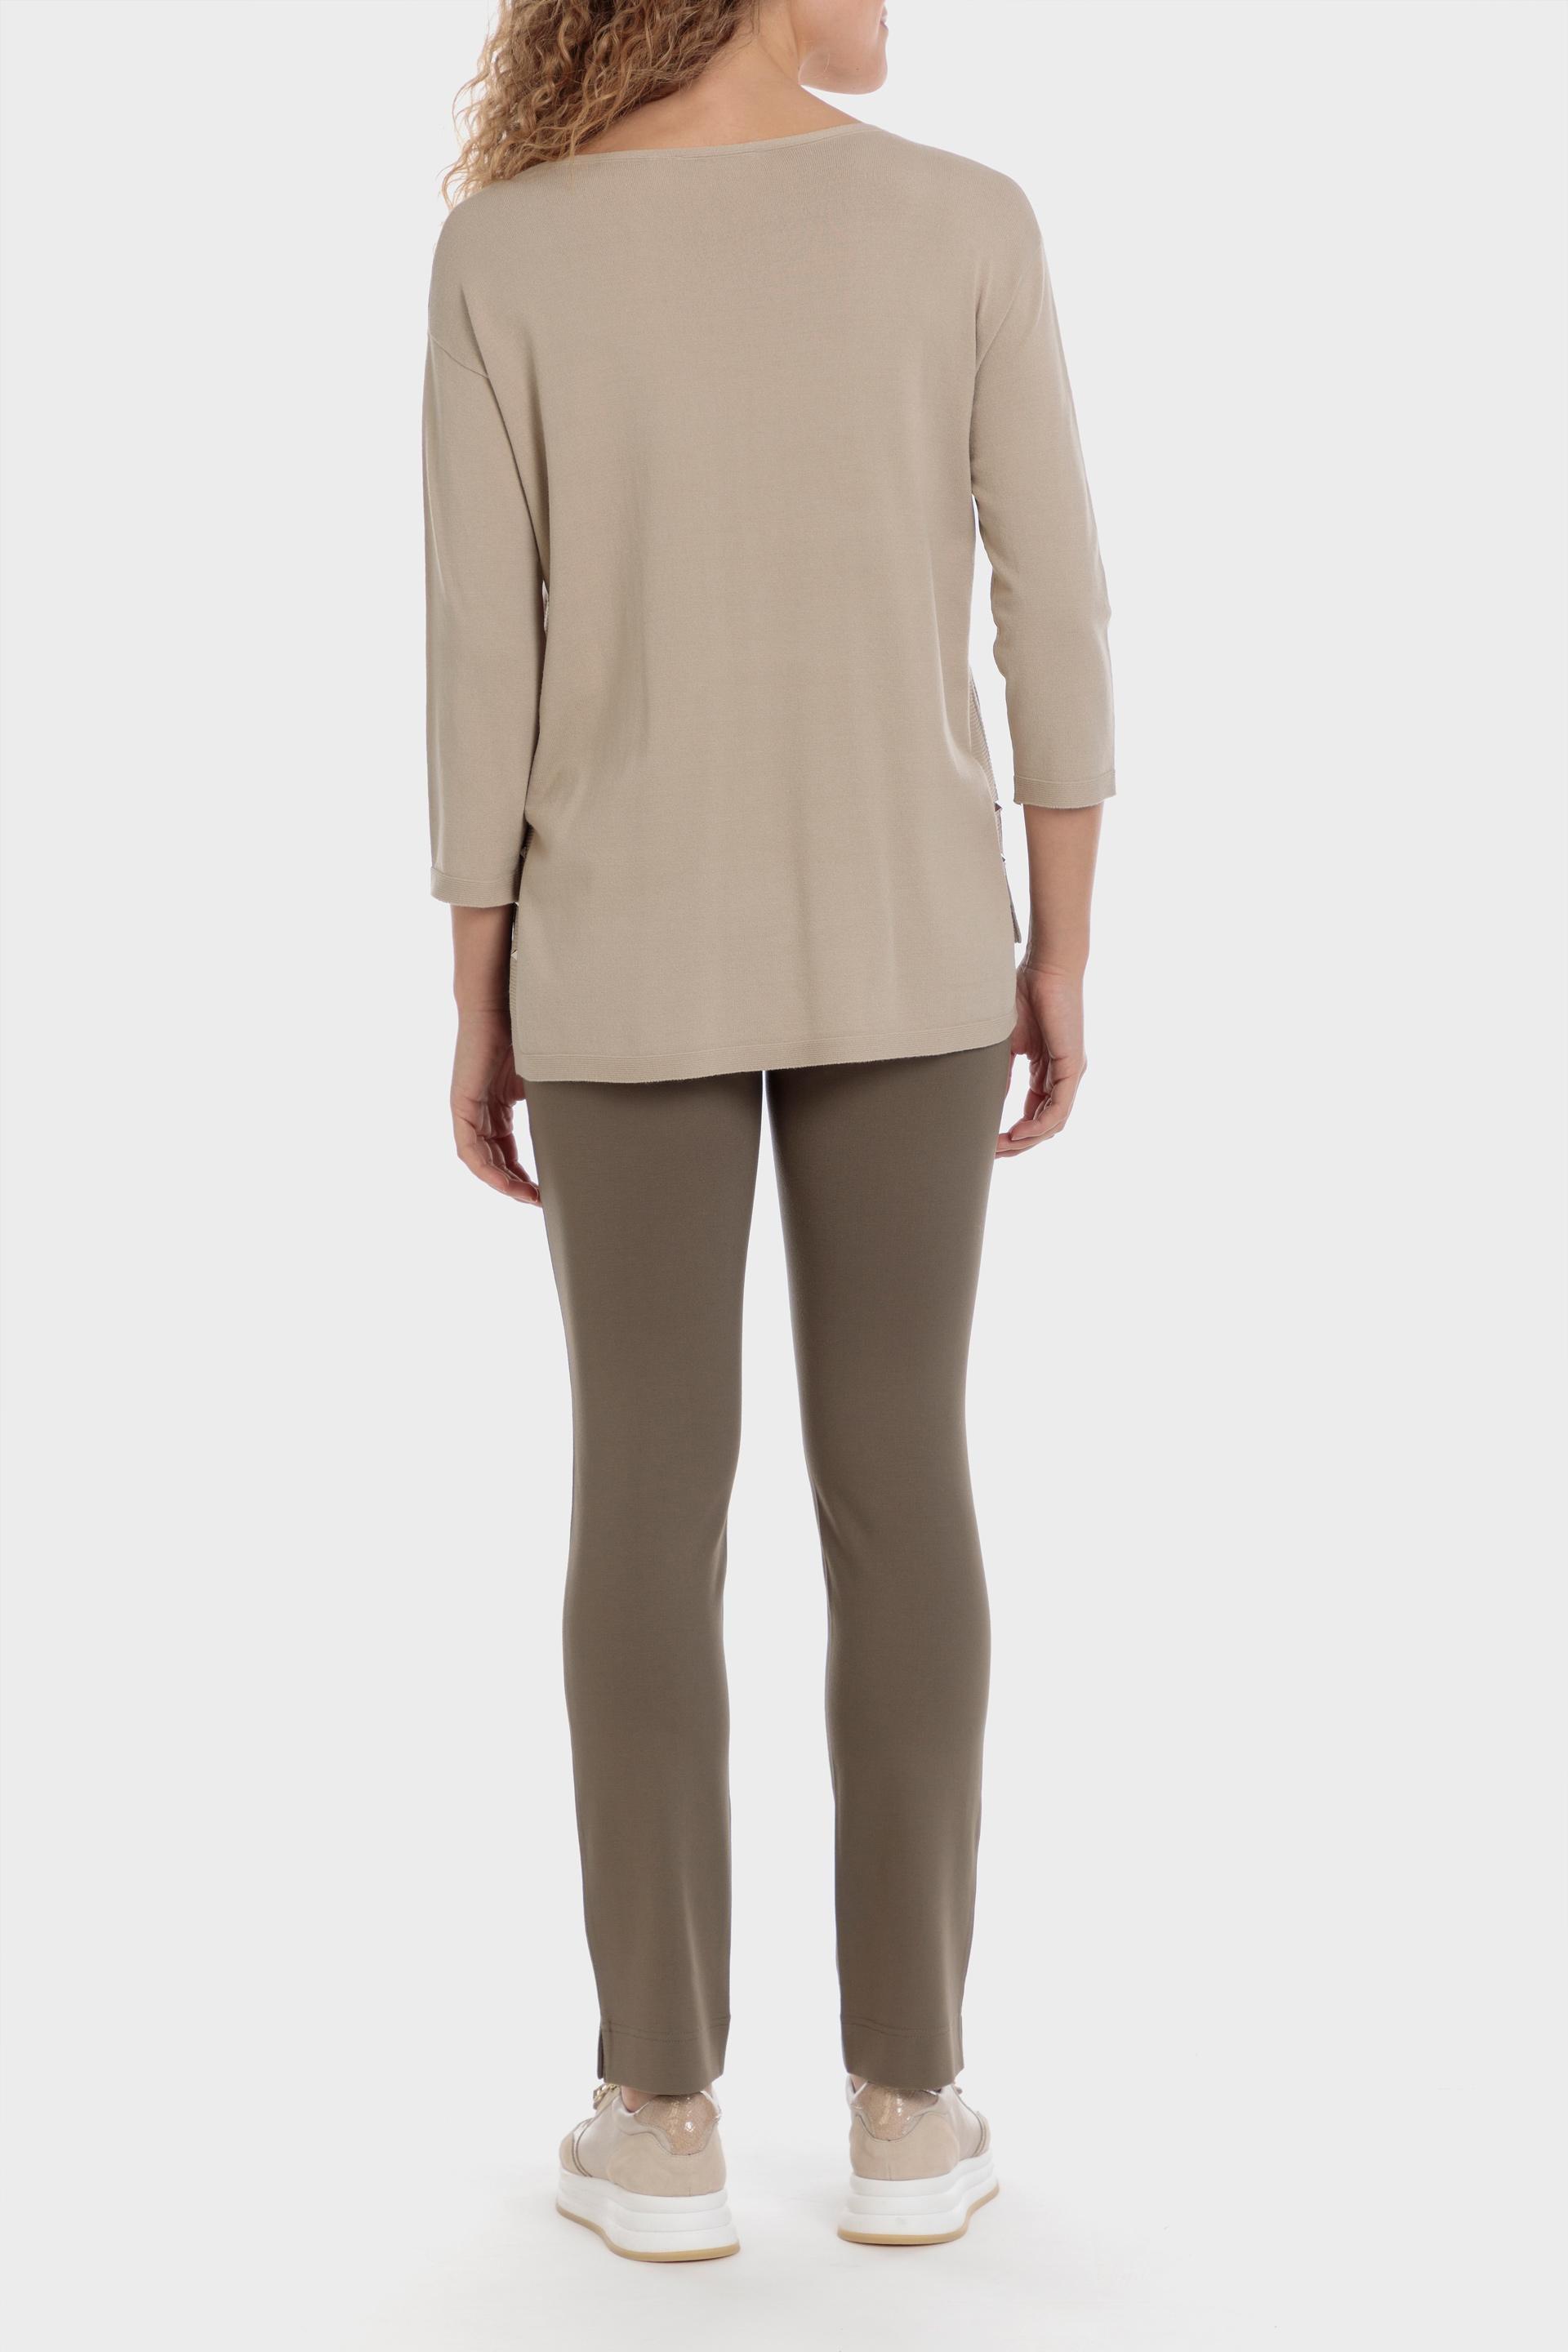 Punt Roma - Beige Studded Sweater